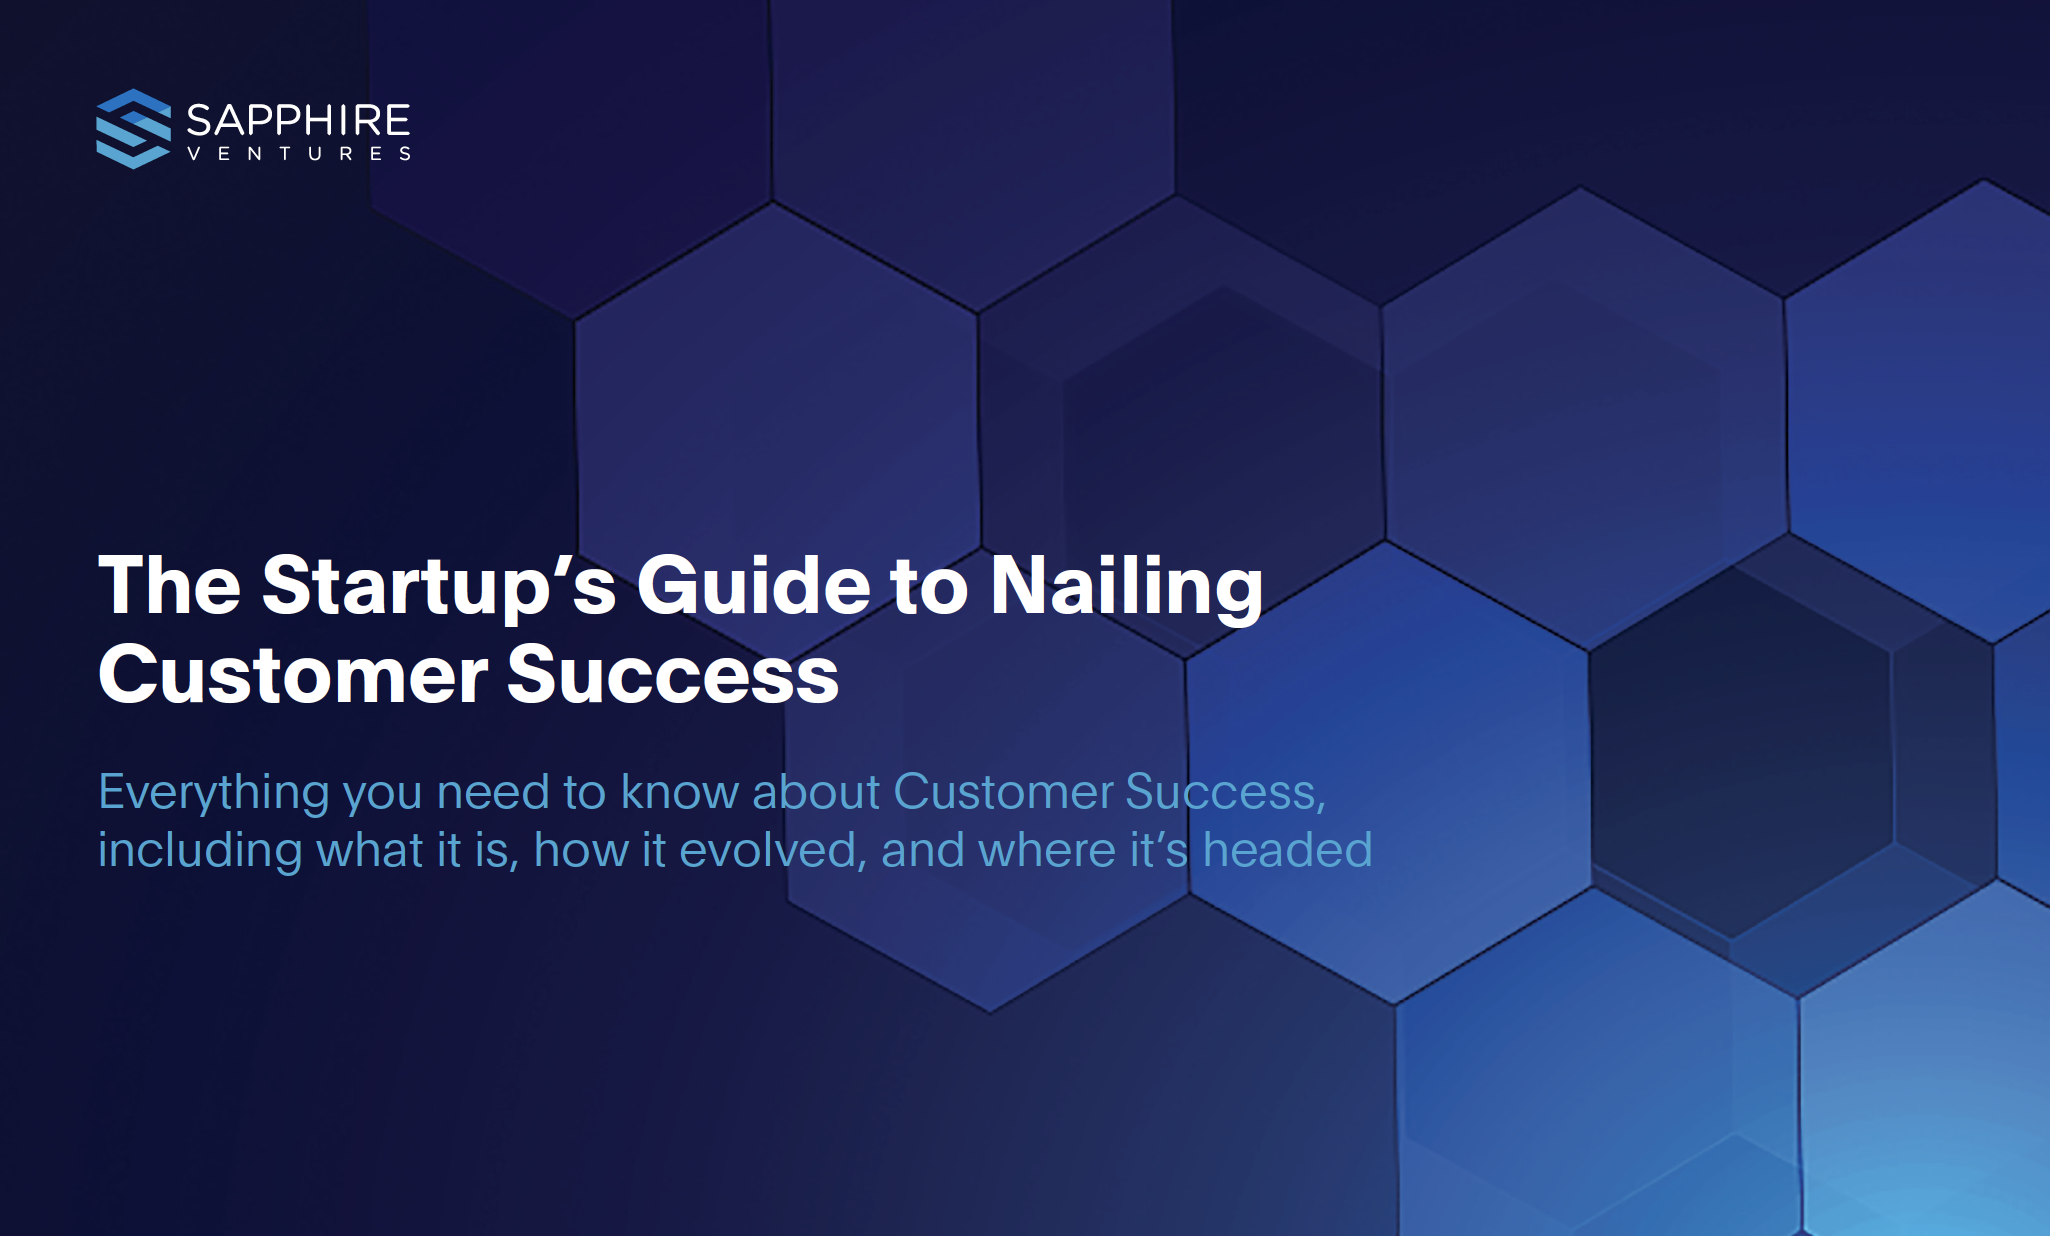 The Startup’s Guide to Nailing Customer Success